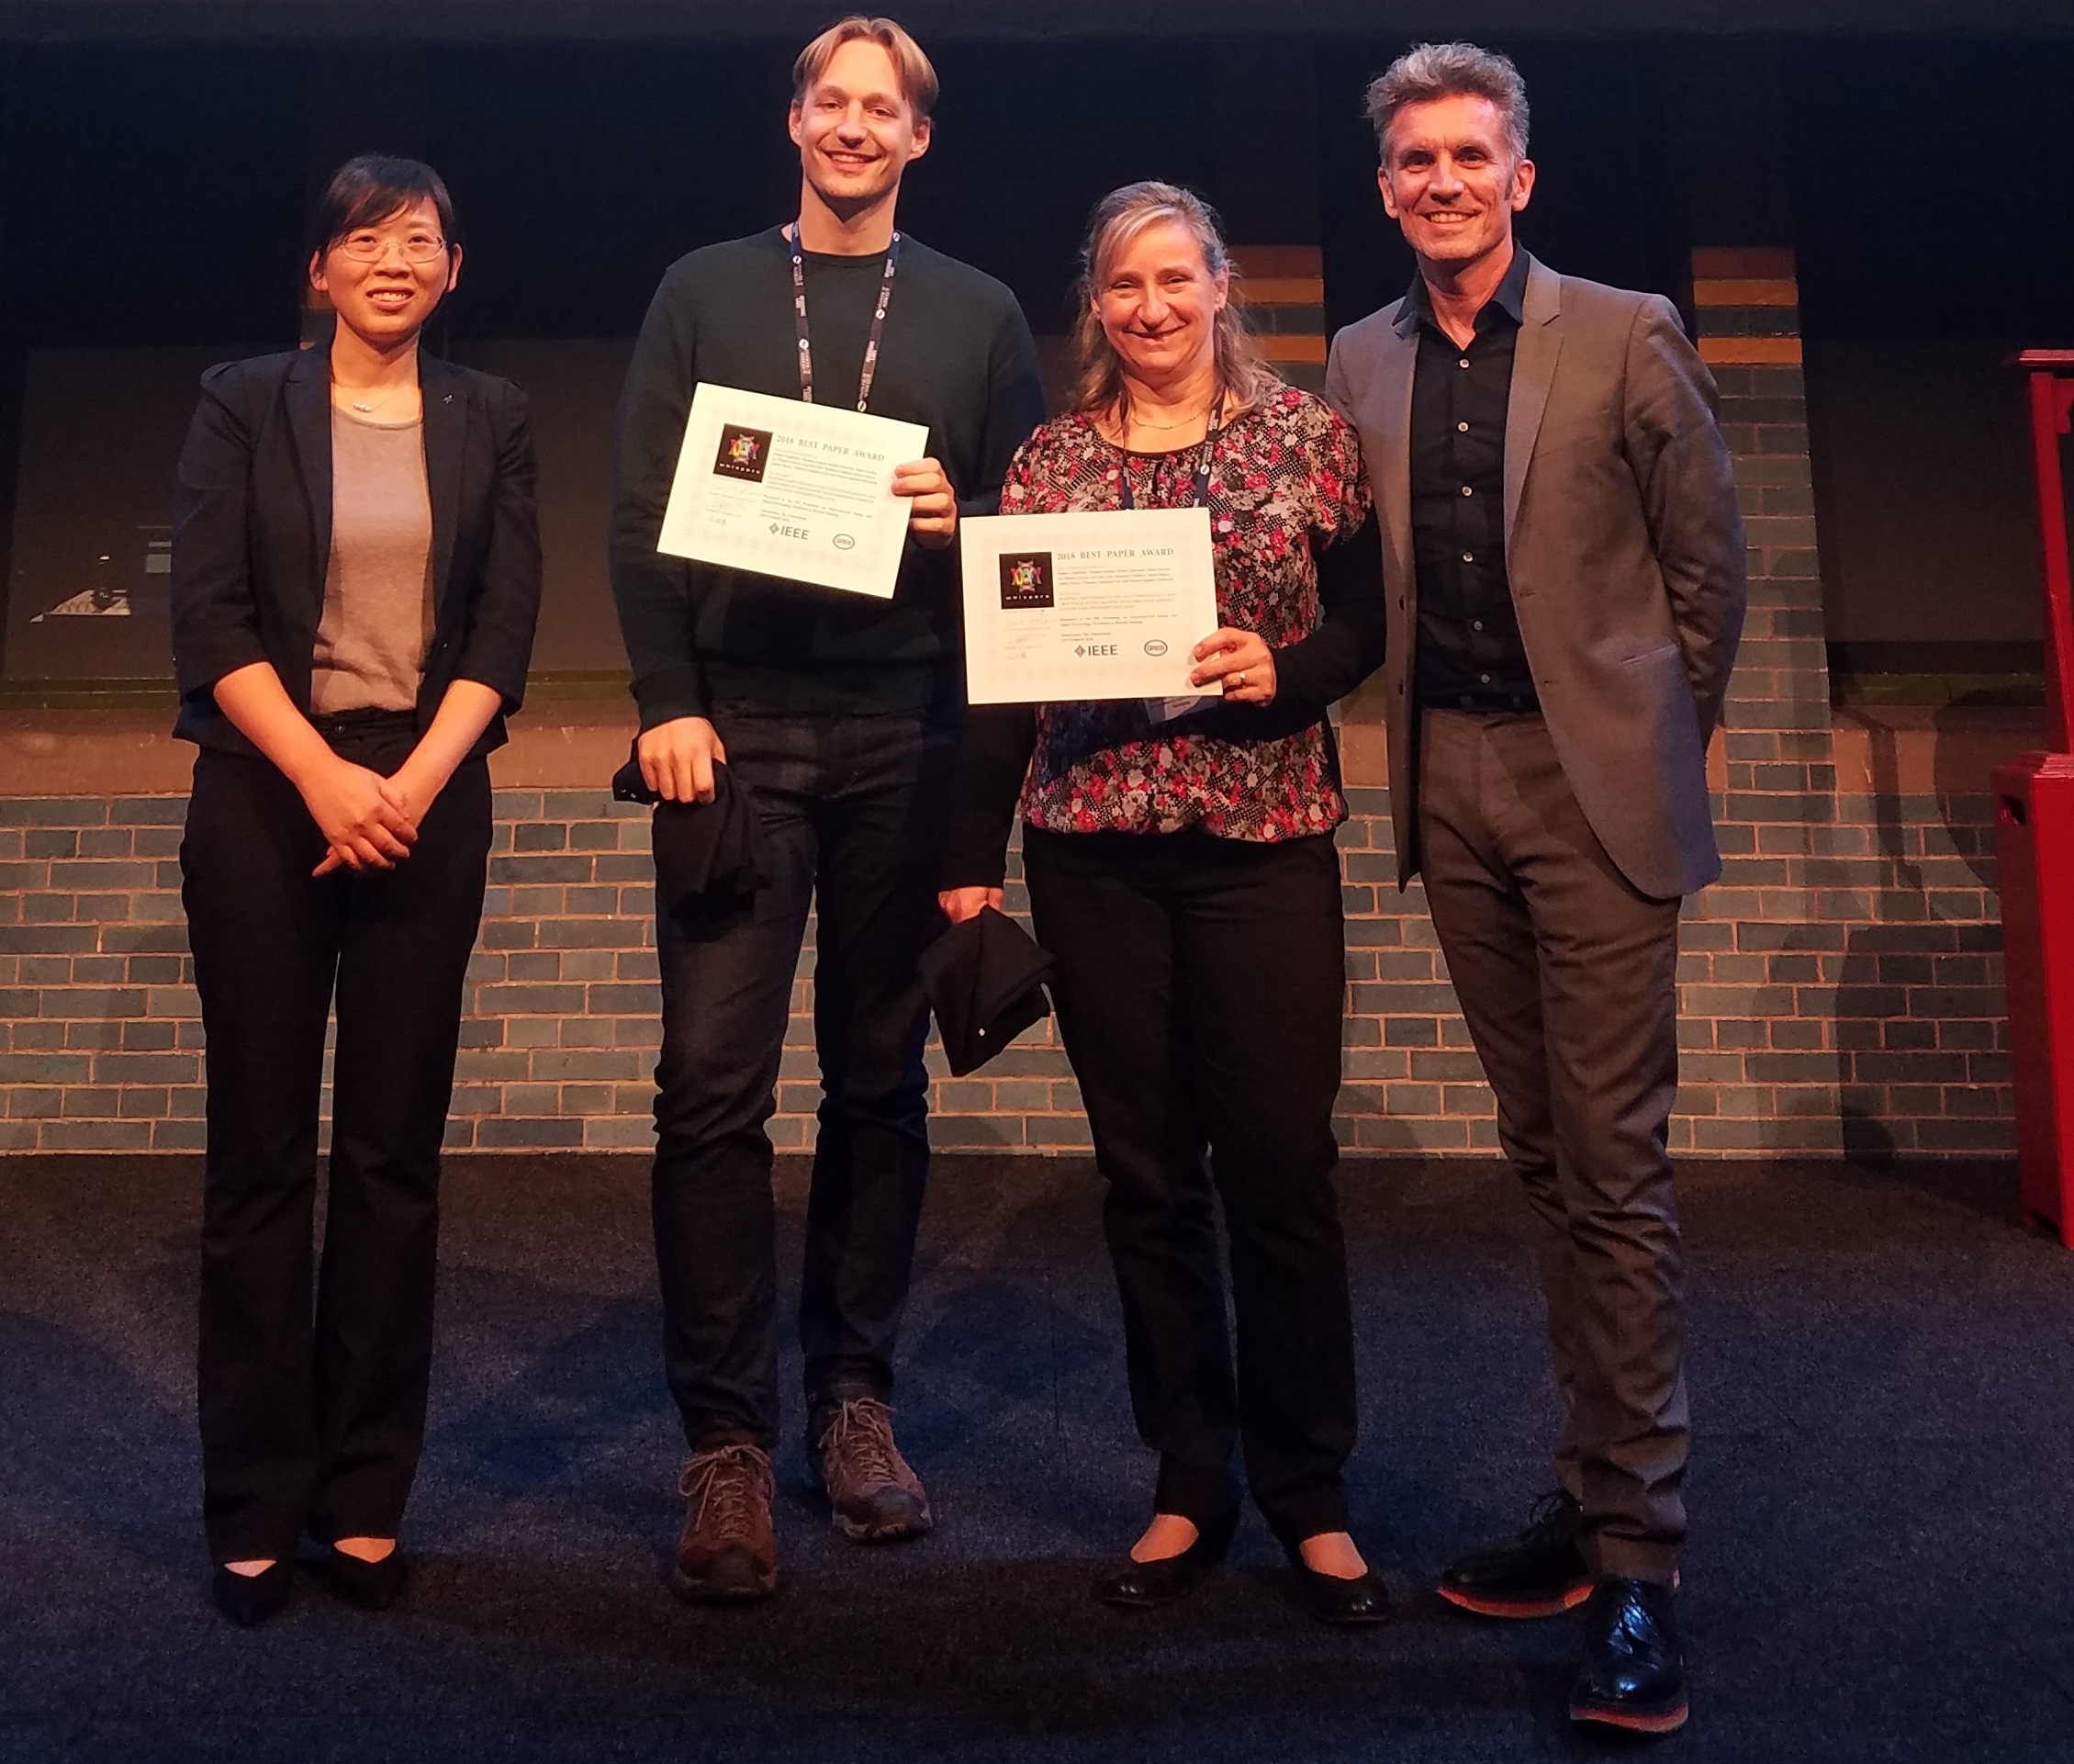 Award ceremony at WHISPERS 2018 with (left to right) X. Zu, R. Milewski, S. Chabrillat, J. Chanussot (image courtesy WHISPERS 2018)